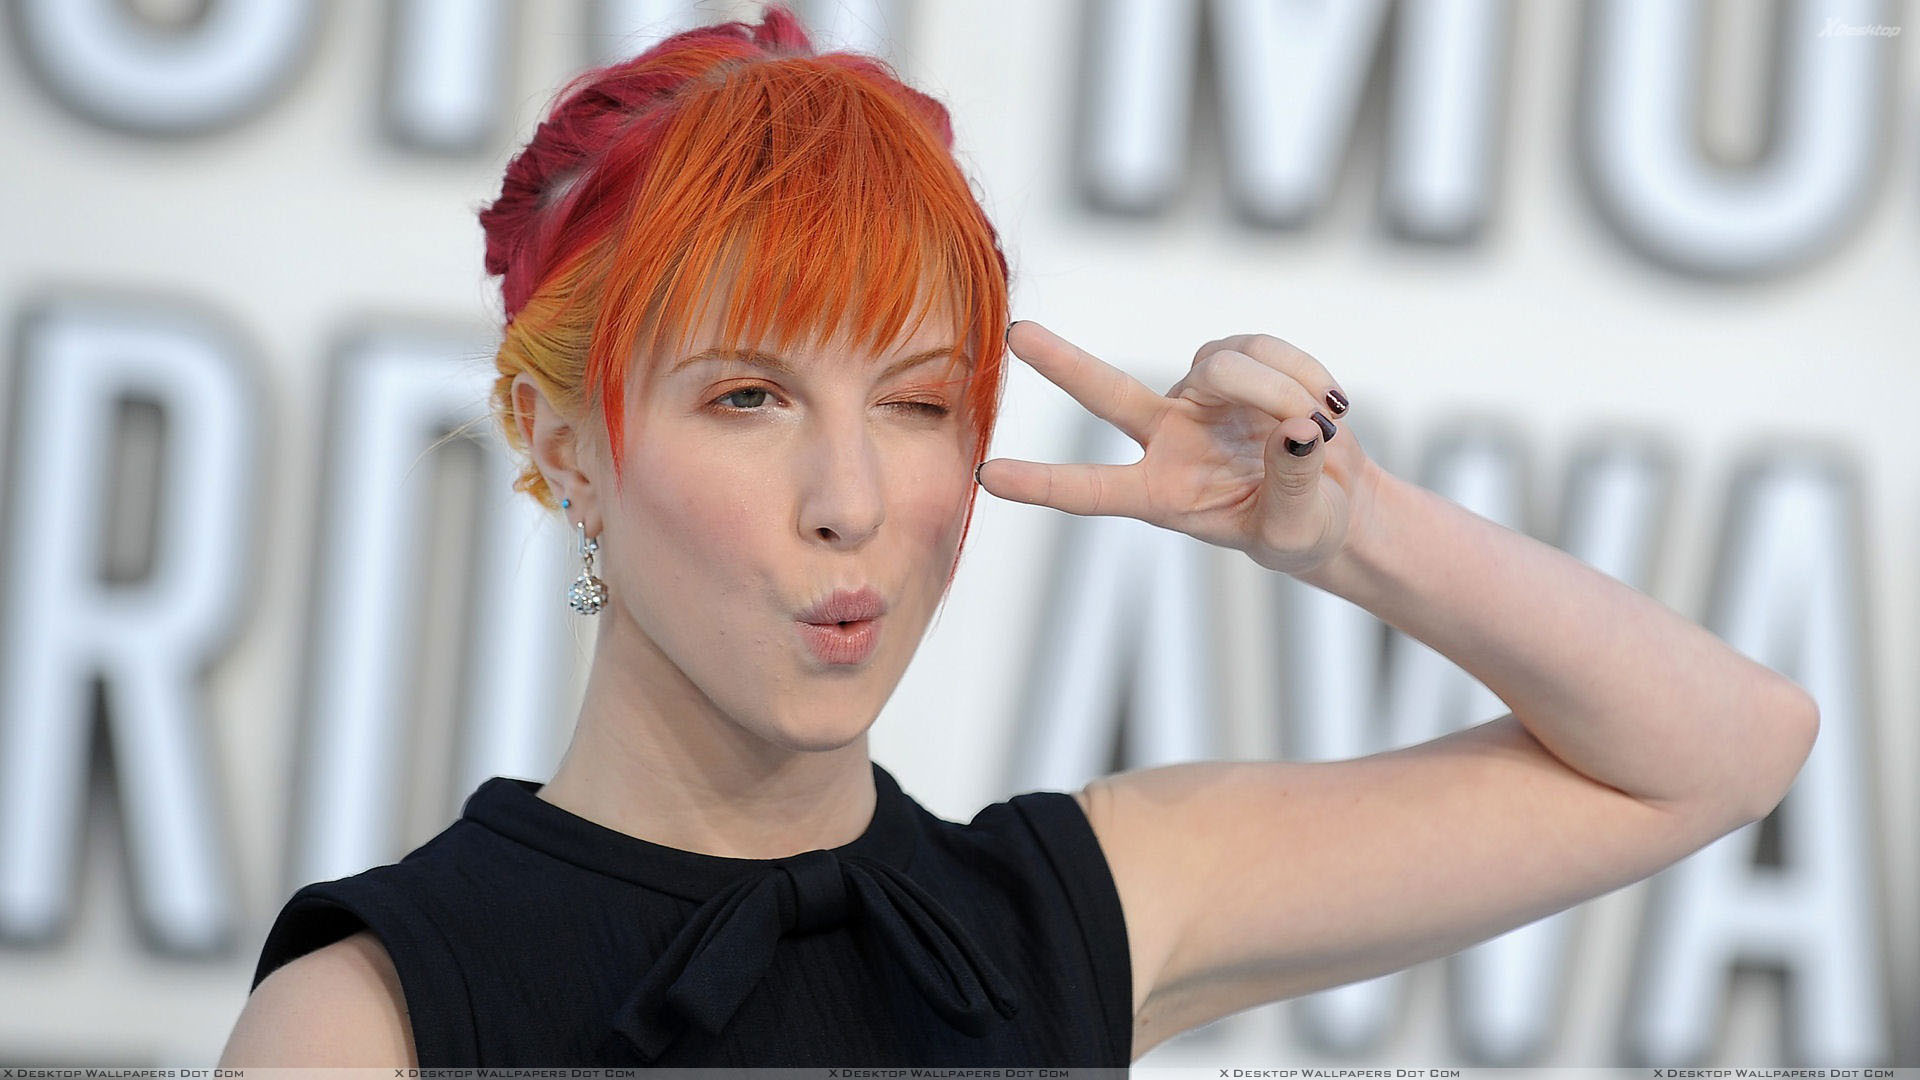 1920x1080 You are viewing wallpaper titled "Hayley Williams ...